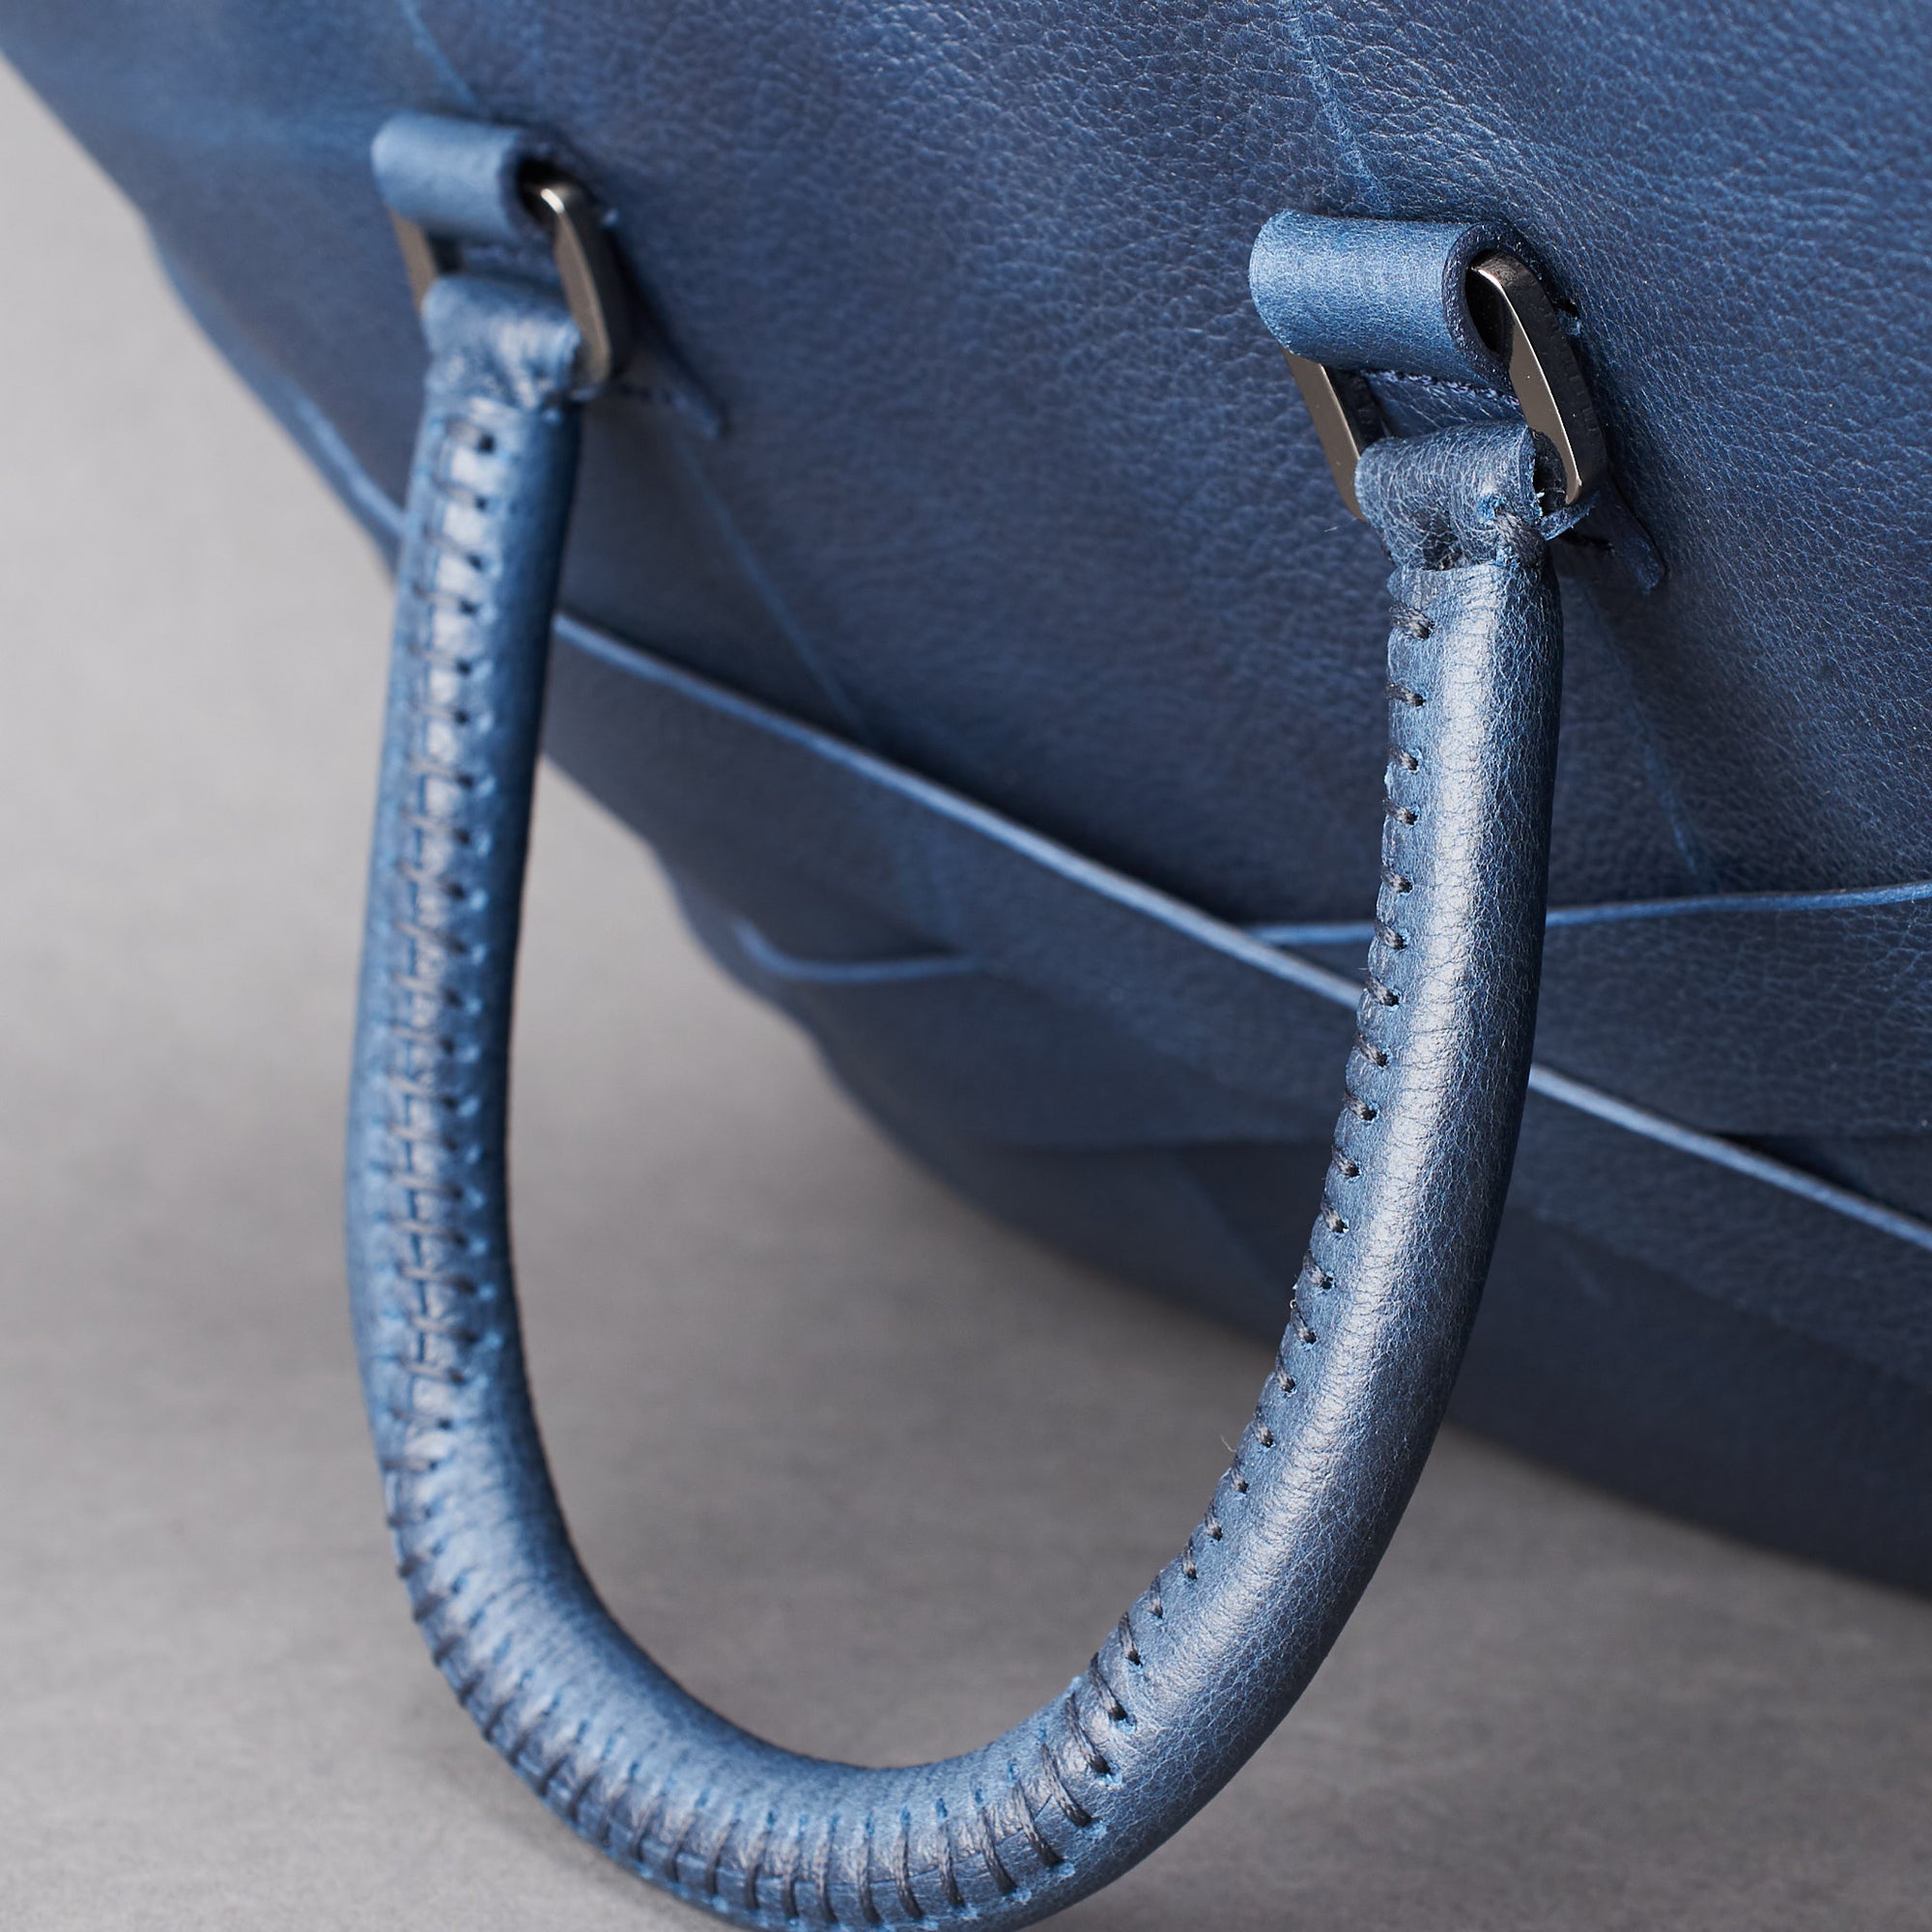 Hand stitch cylindrical handle detail. Blue leather briefcase laptop bag for men. Gazeli laptop briefcase by Capra Leather.